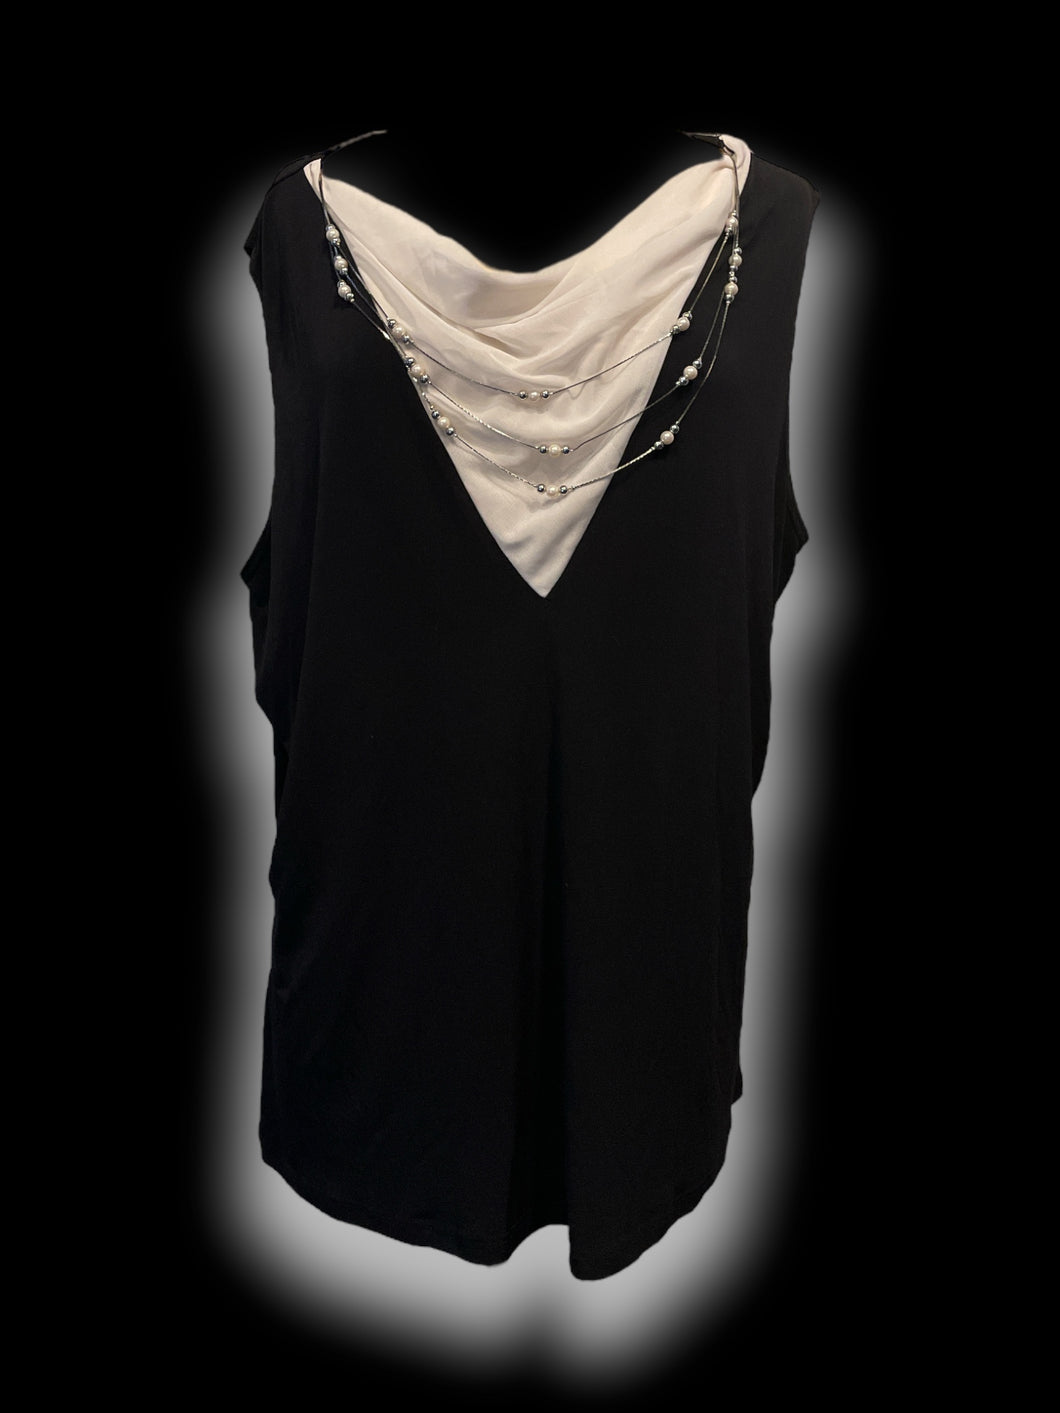 5X Black sleeveless top w/ built in bead necklace, & white mesh bust detail